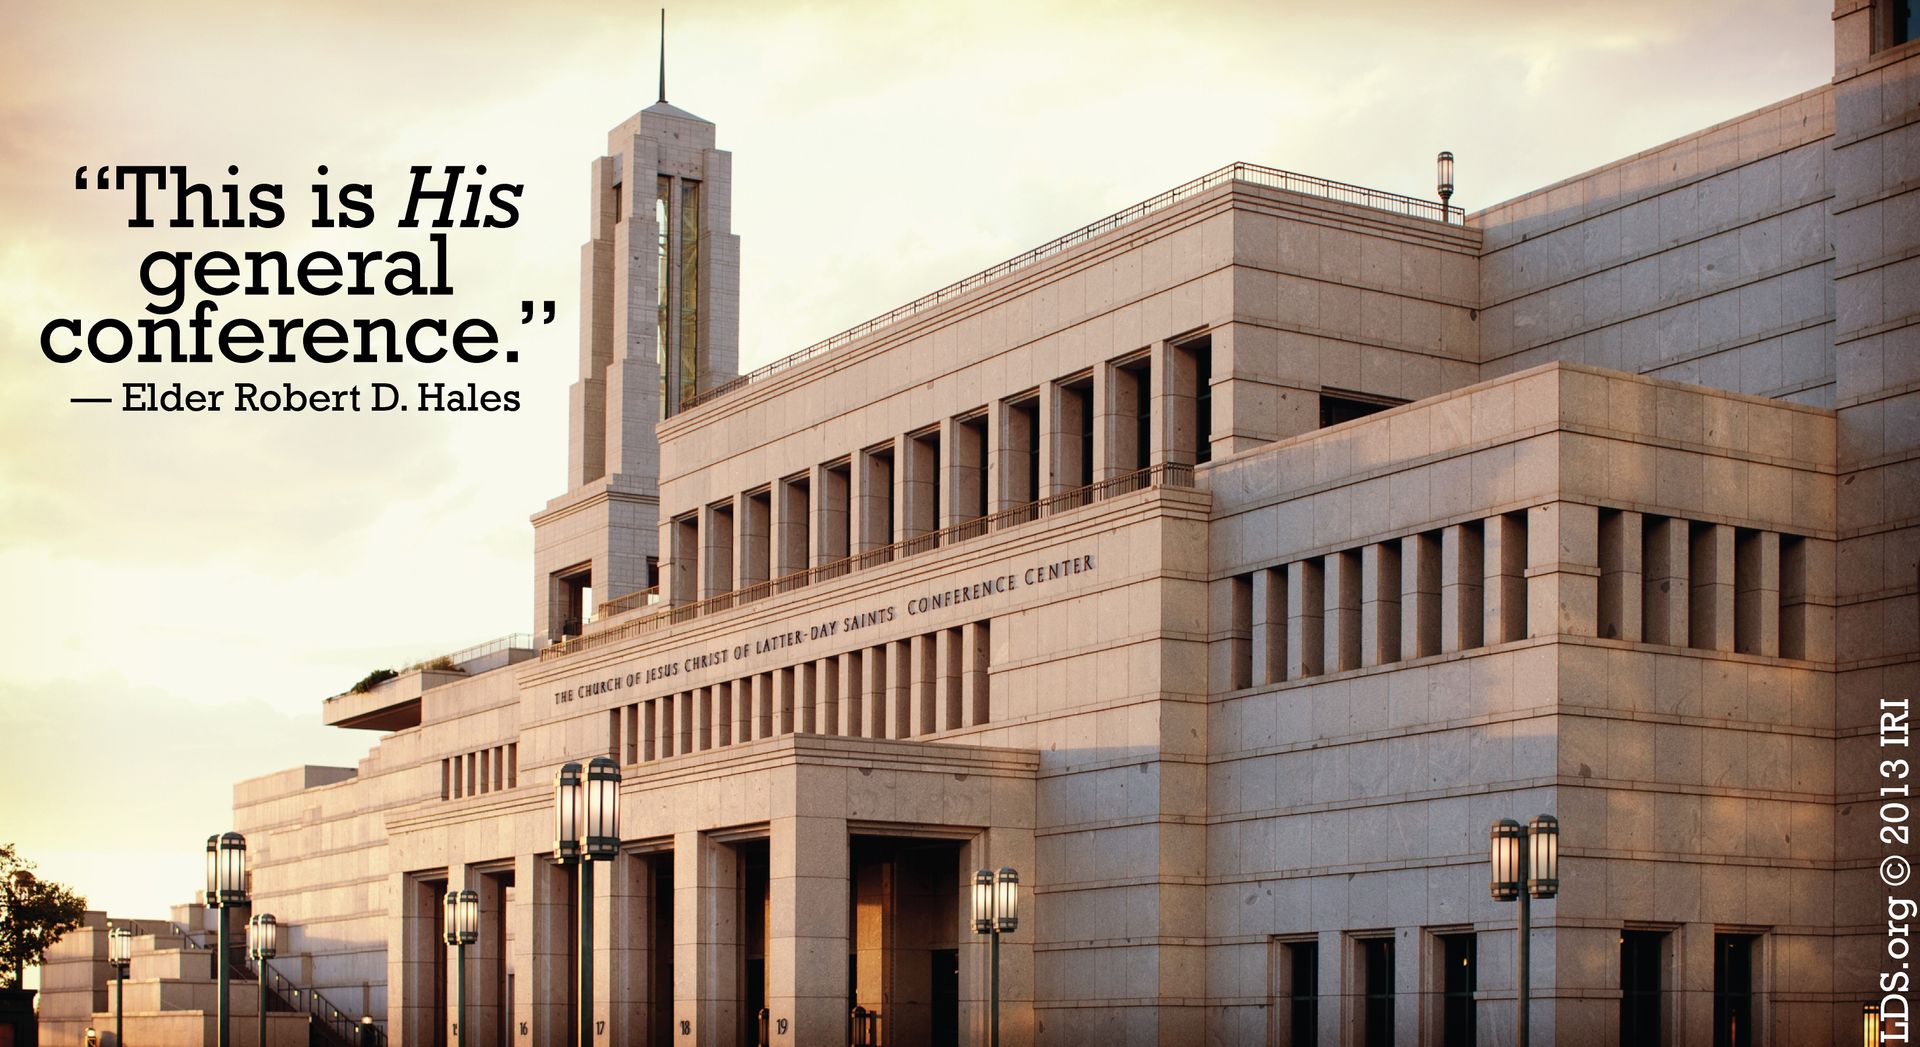 “This is His general conference.”—Elder Robert D. Hales, “General Conference: Strengthening Faith and Testimony” © undefined ipCode 1.